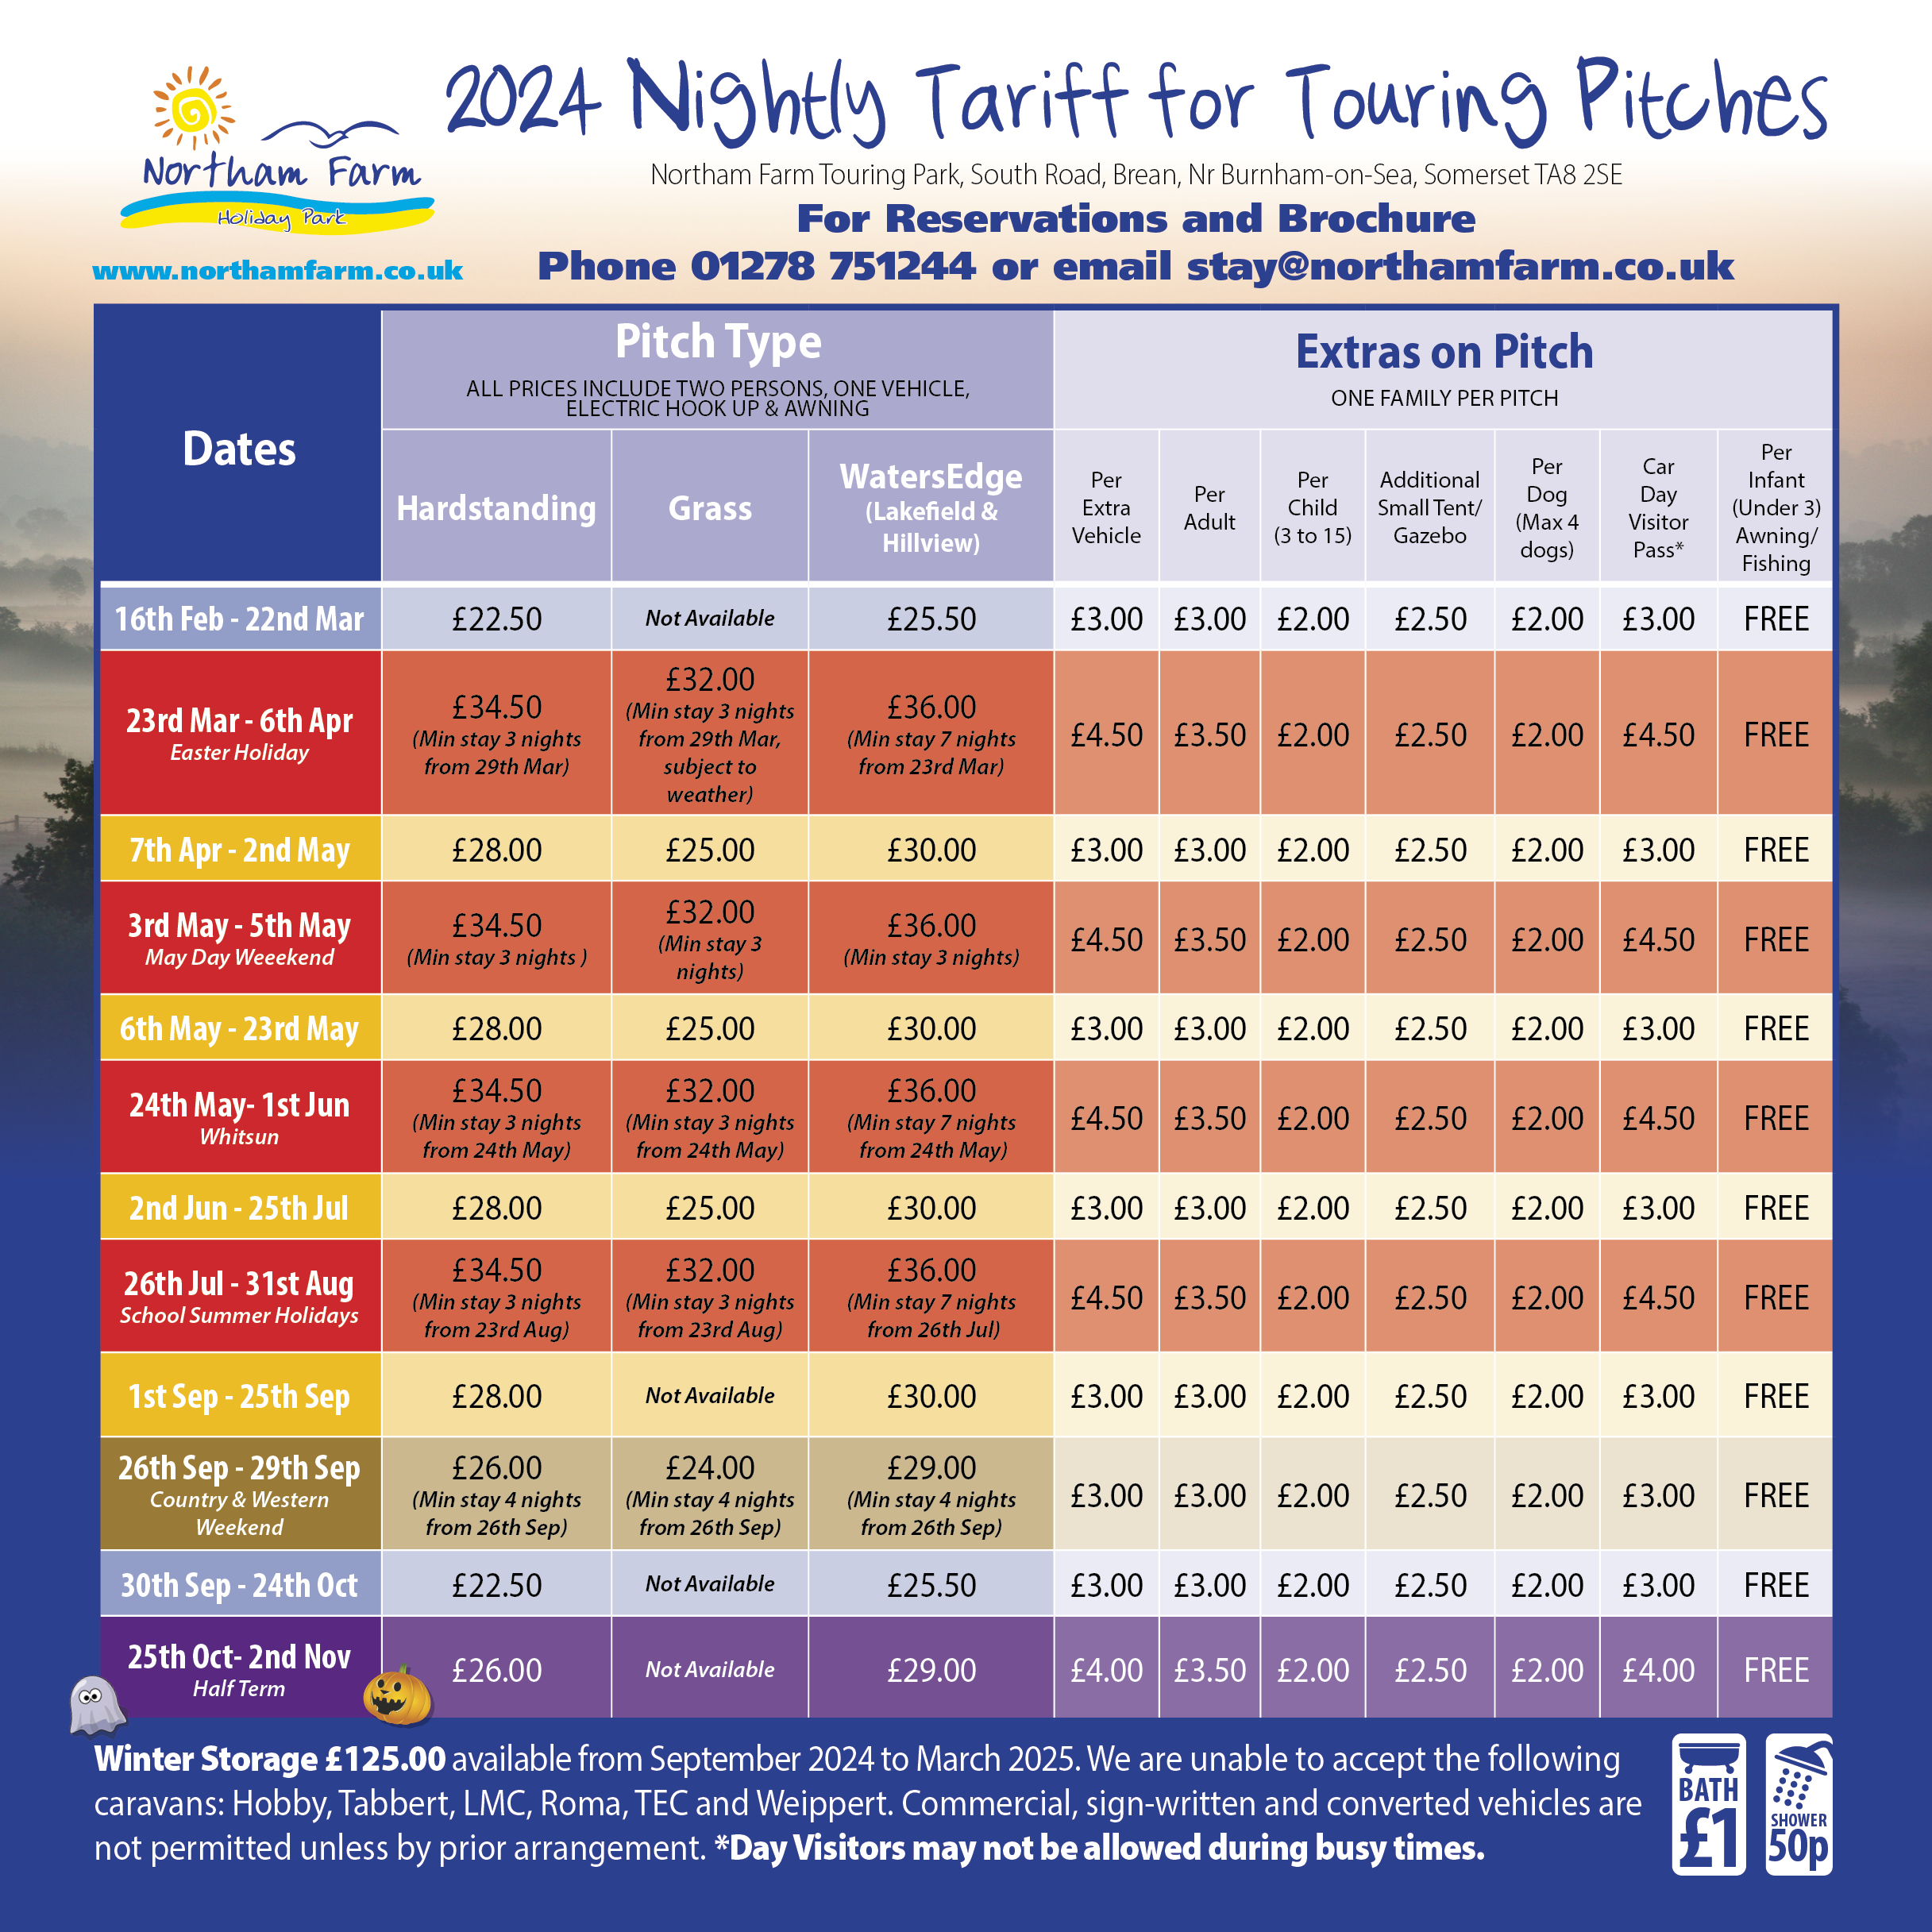 Northam Farm 2019 Nightly Tariff for Touring Pitches